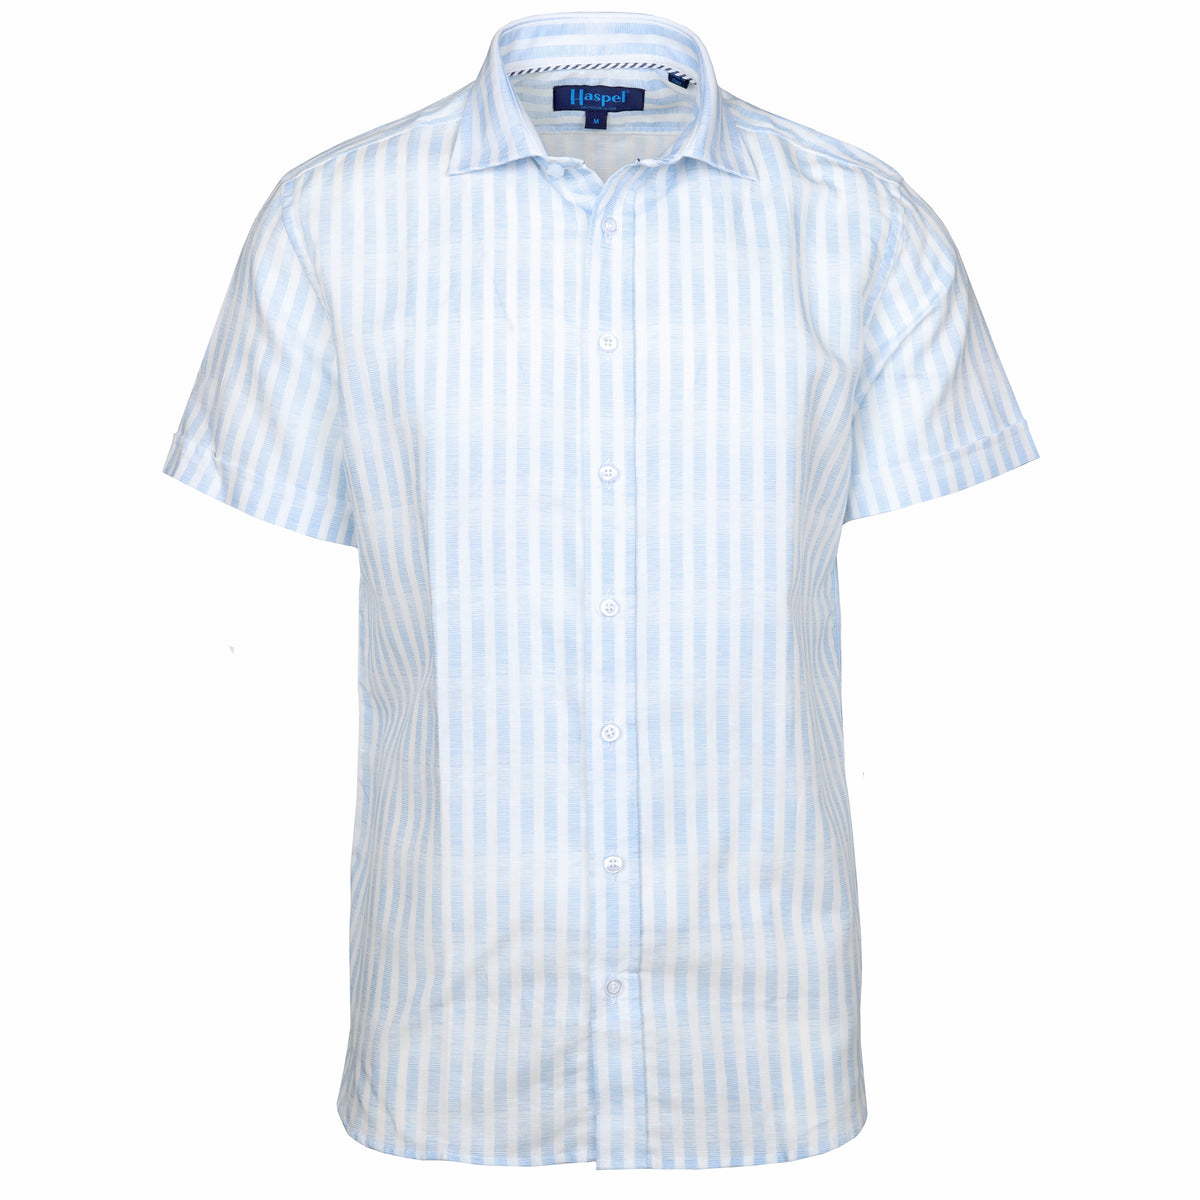 Our summer weave cotton for maximum air flow and those blue and white stripes we all know and love.  100% Cotton  •  Spread Collar  •  Short Sleeve  •  Chest Pocket  •  Machine Washable  •  Made in Italy